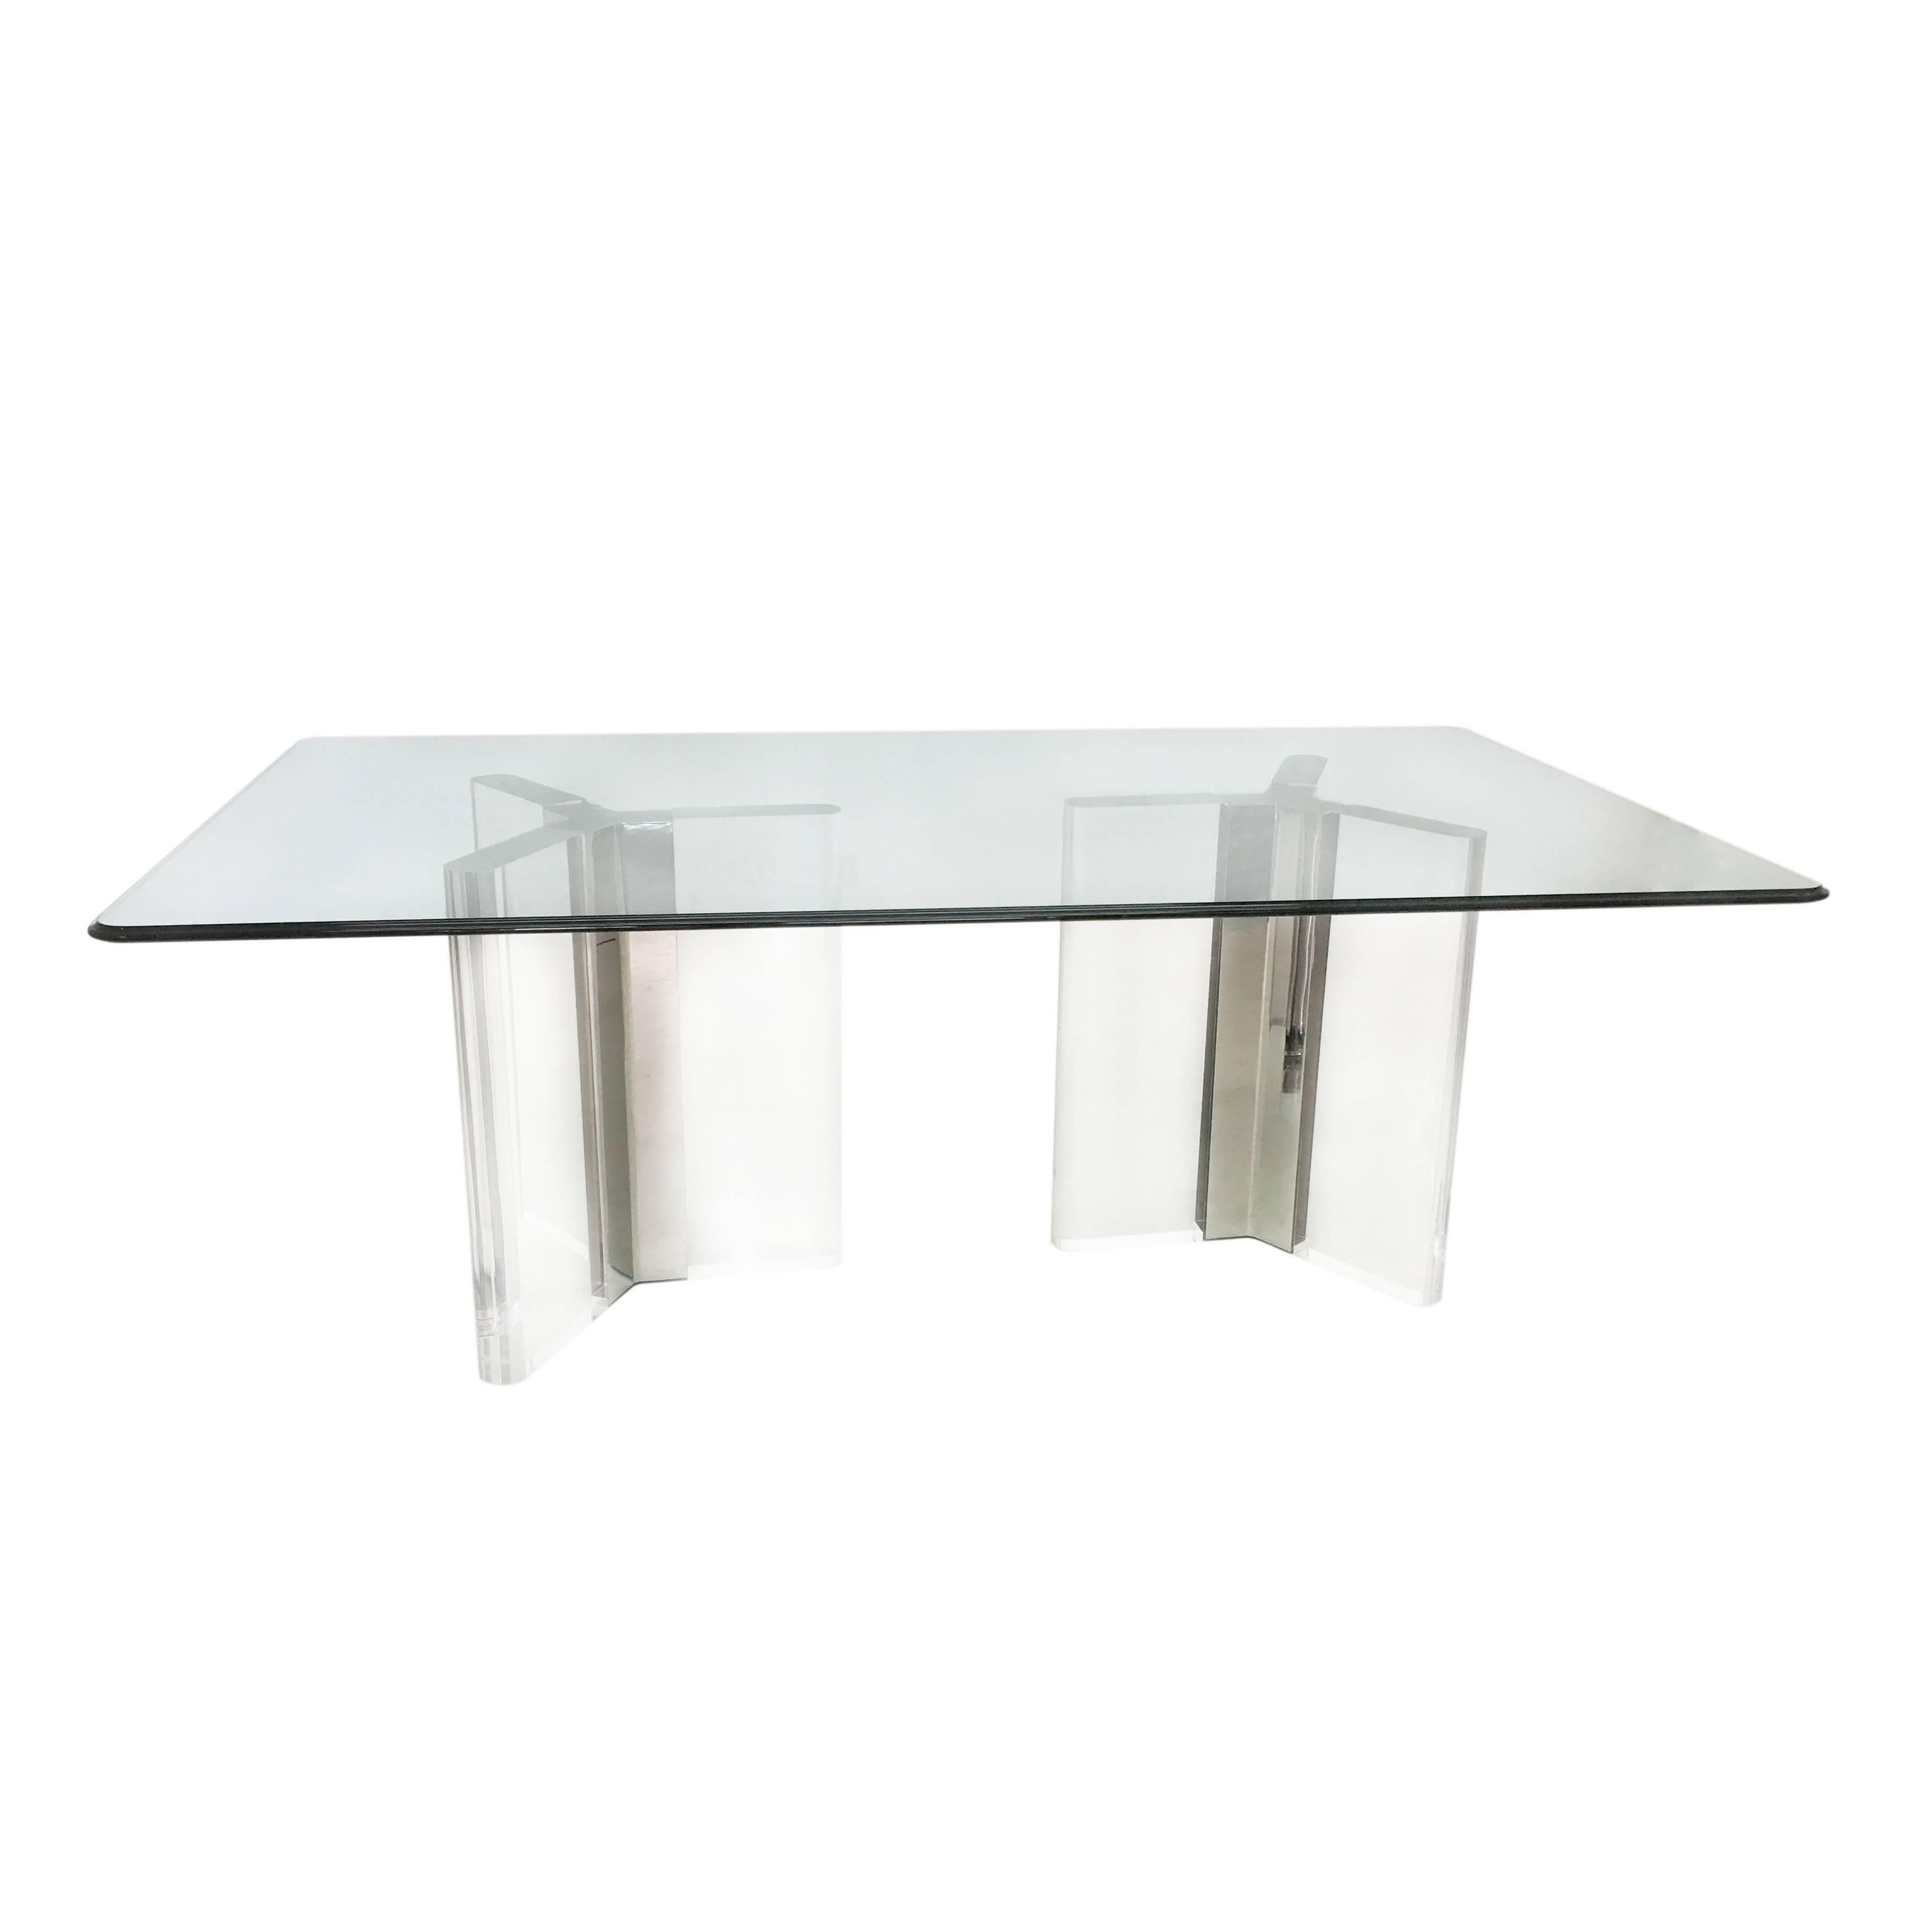 Substantial Mid-Century Modern/Hollywood Regency Lucite and chrome based, glass topped dining table similar to that of Leon Rosen for Pace. Lucite and chrome in excellent condition with one or two minor blemishes. Slight scratching on glass top. Age